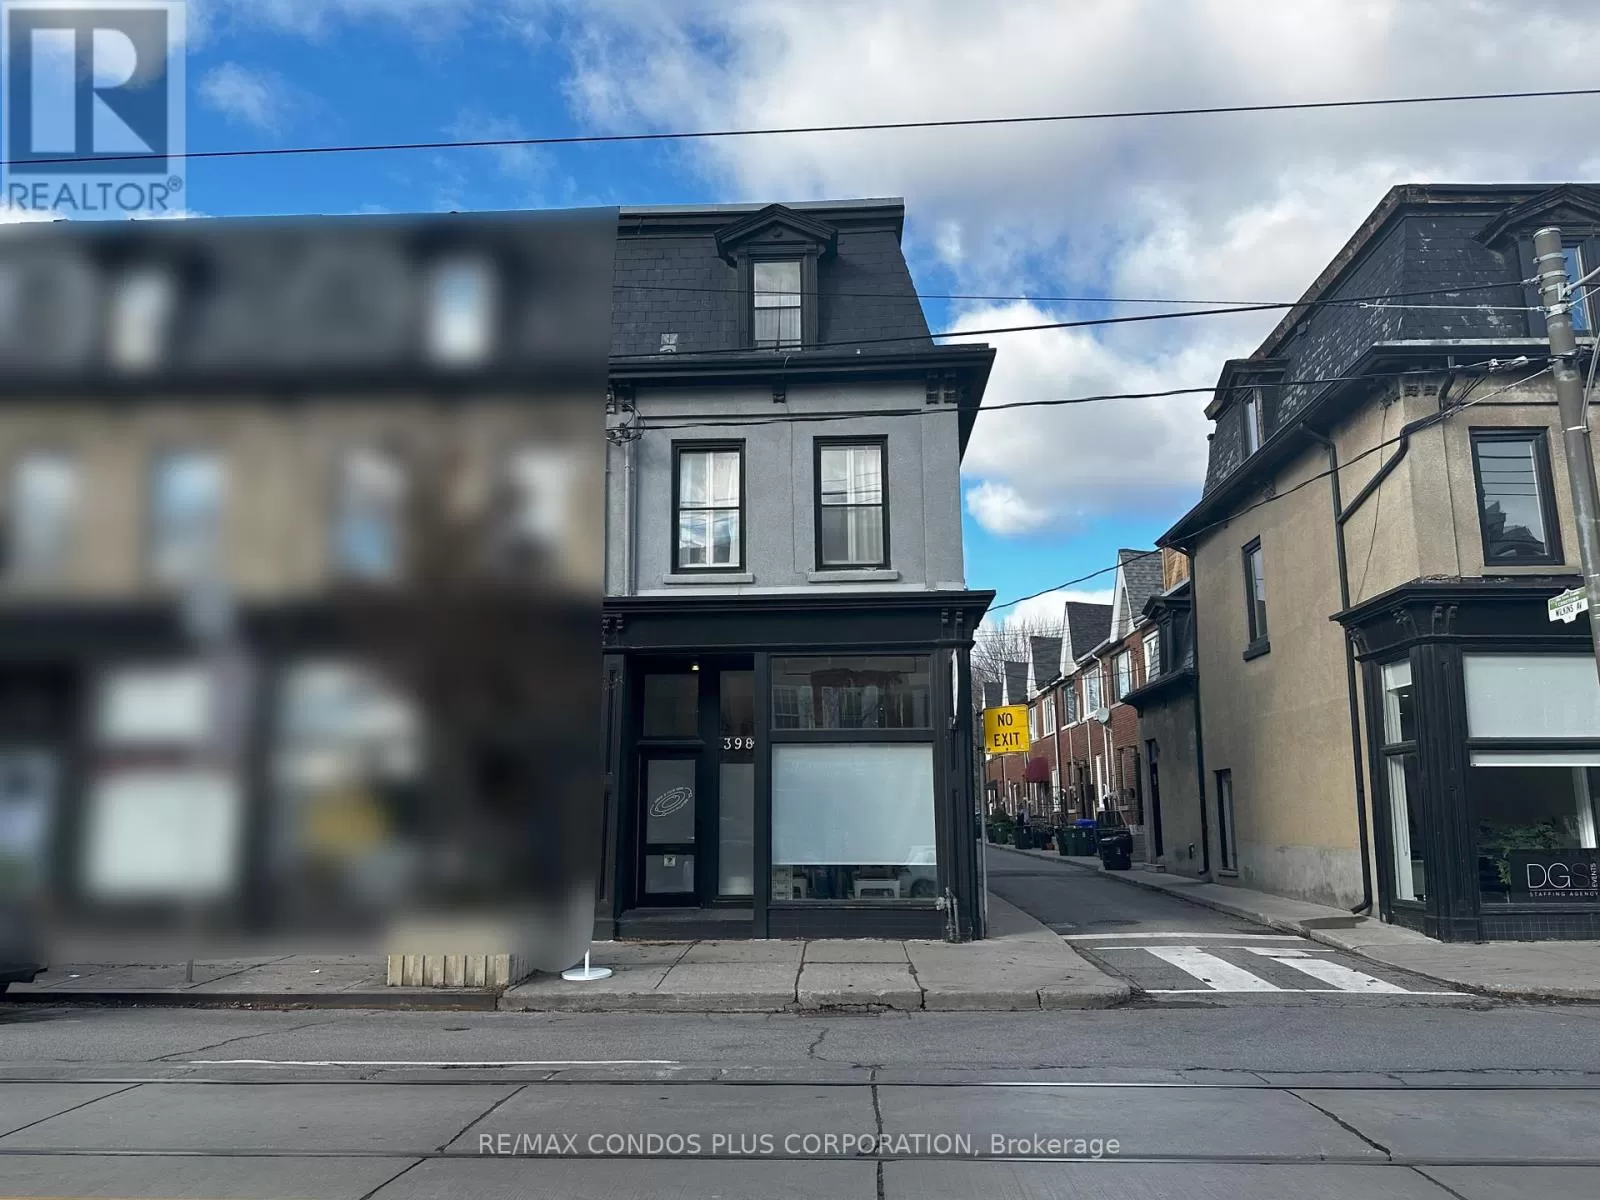 Residential Commercial Mix for rent: 398 King Street E, Toronto, Ontario M5A 1K9